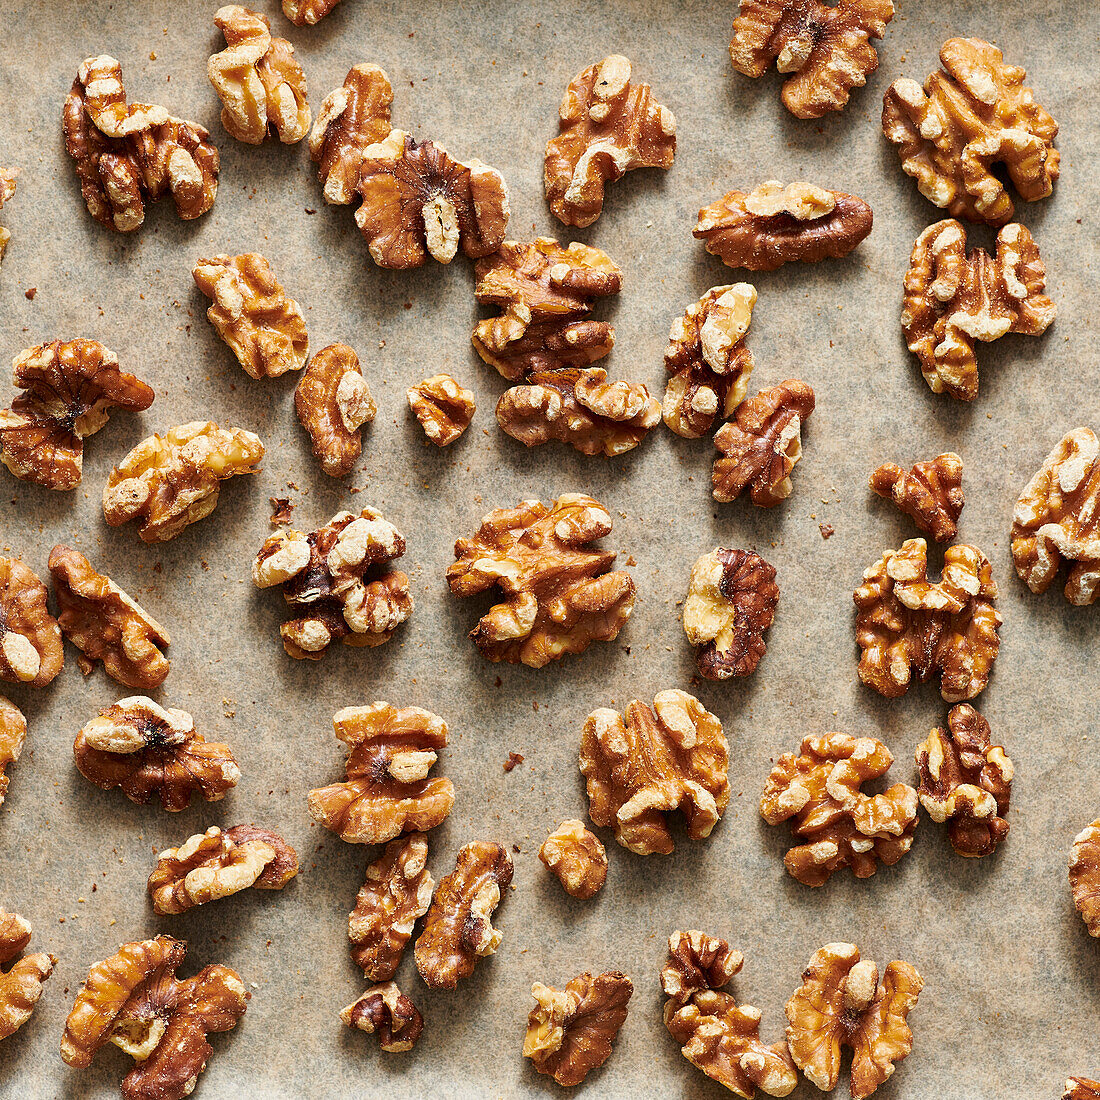 Roasted walnuts on parchment paper in a pan